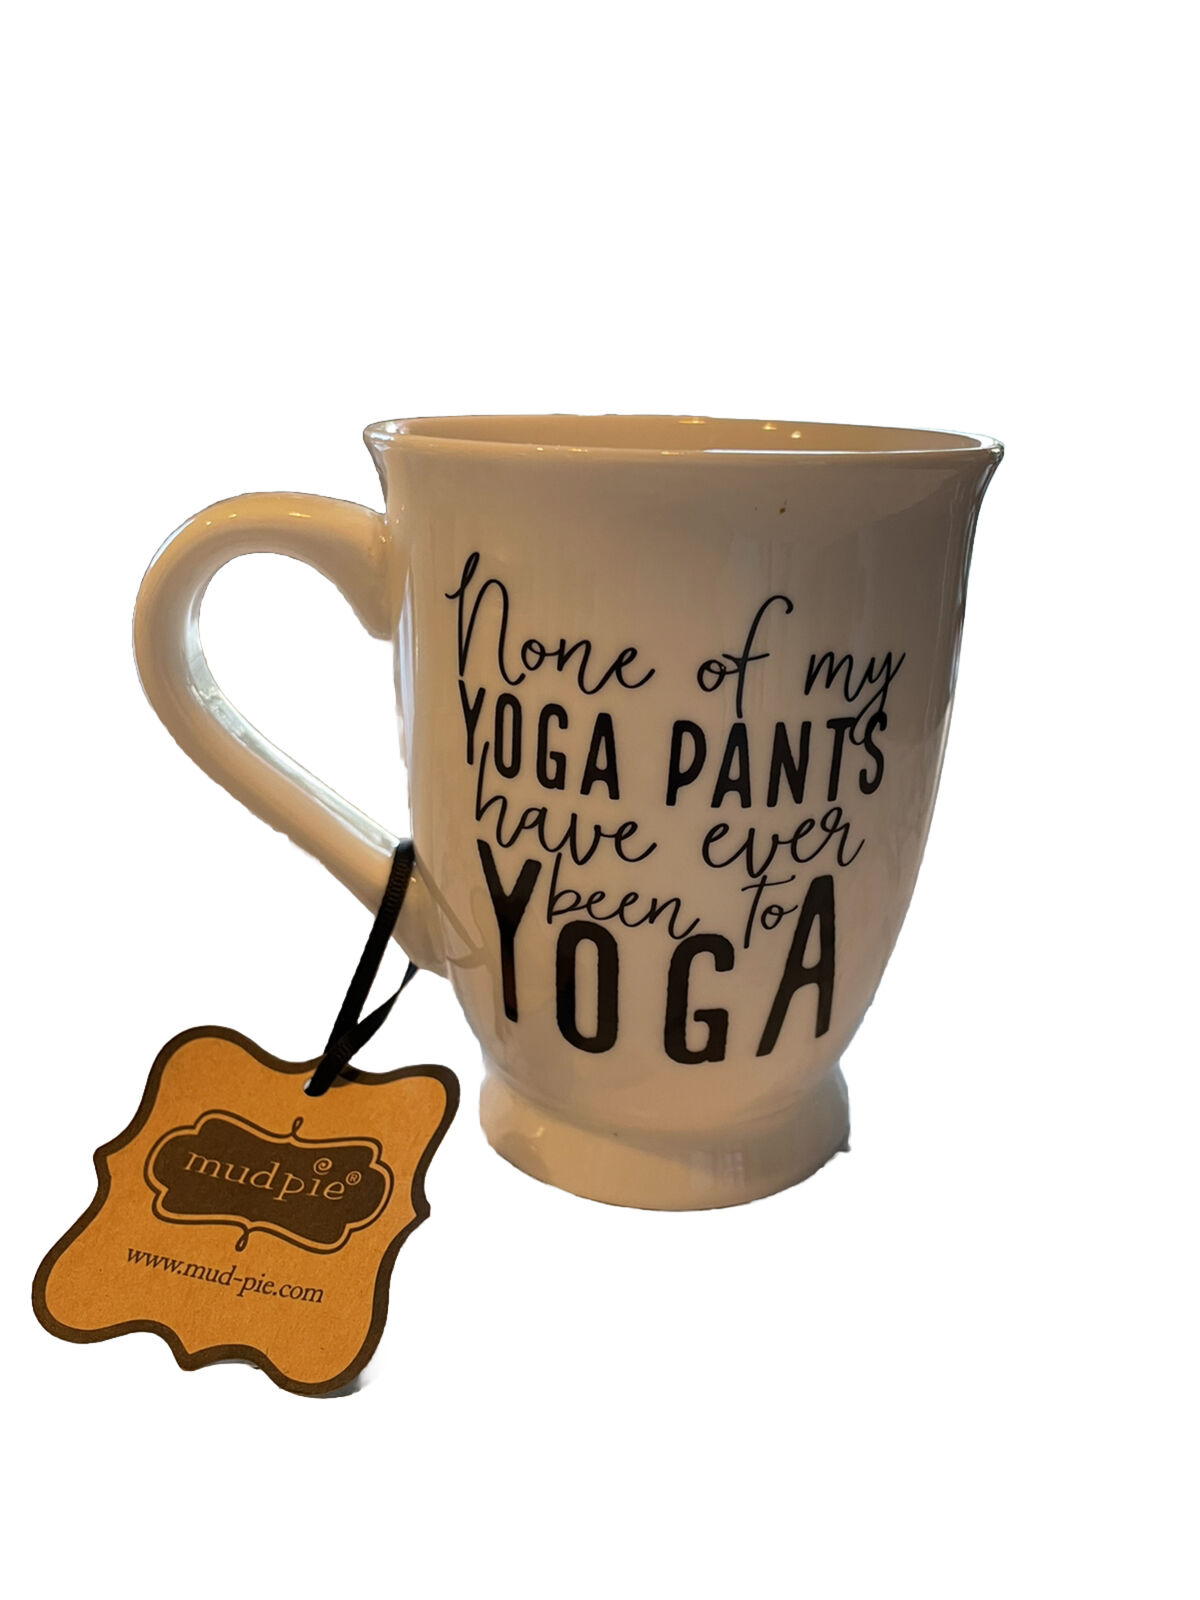 Mud Pie Mug Coffee “None of my yoga pants have ever been to yoga” Lashes Lulu